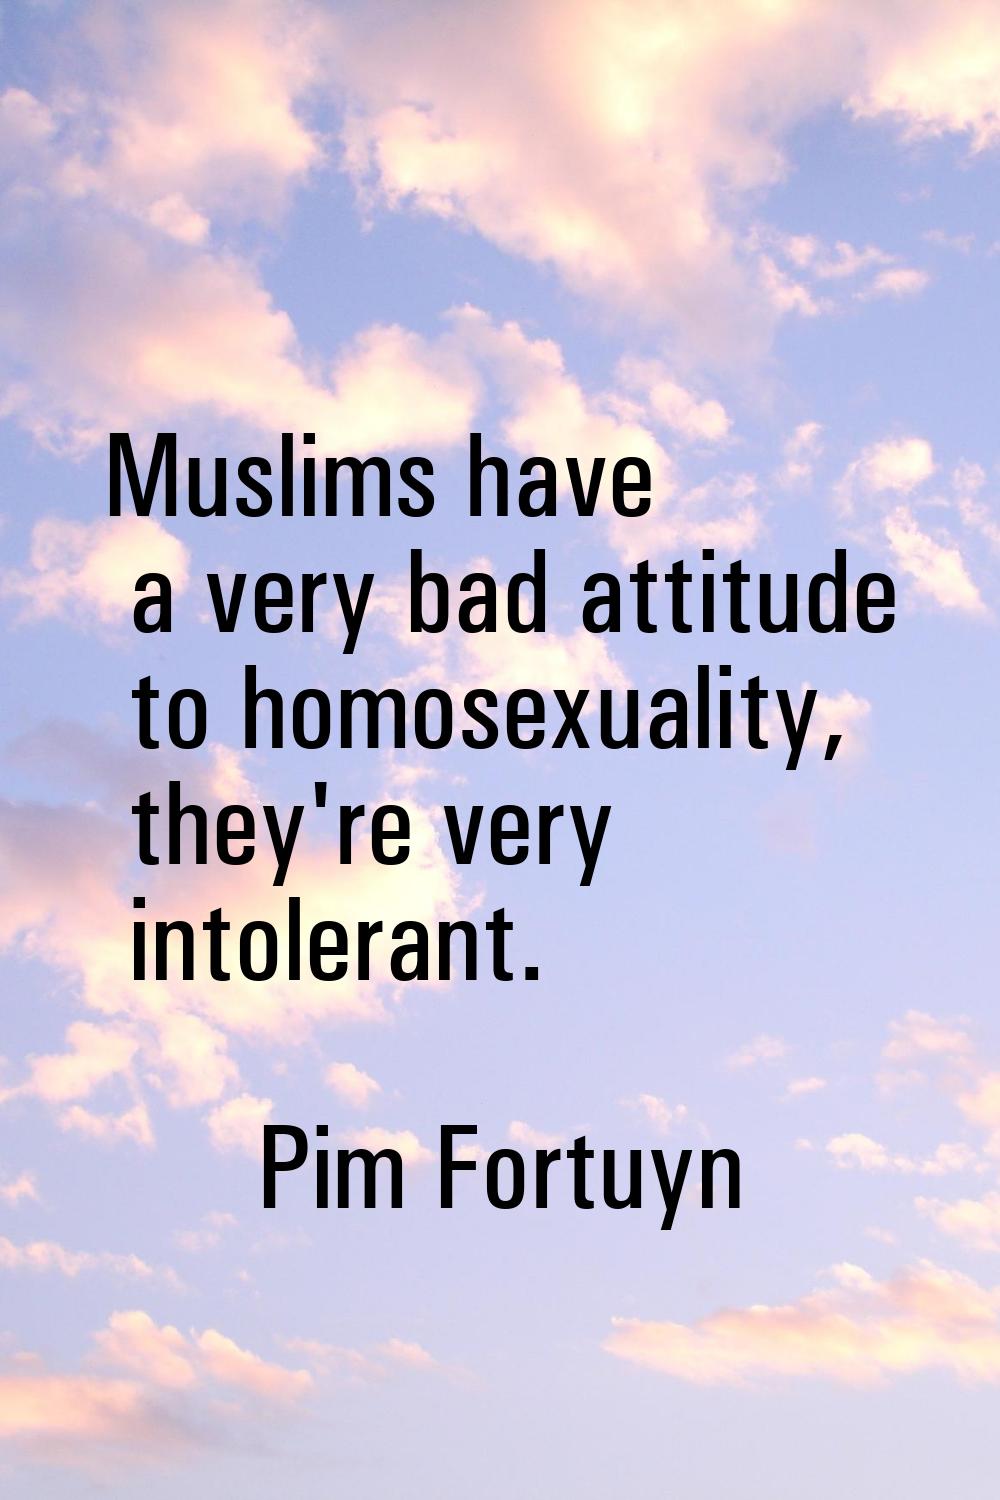 Muslims have a very bad attitude to homosexuality, they're very intolerant.